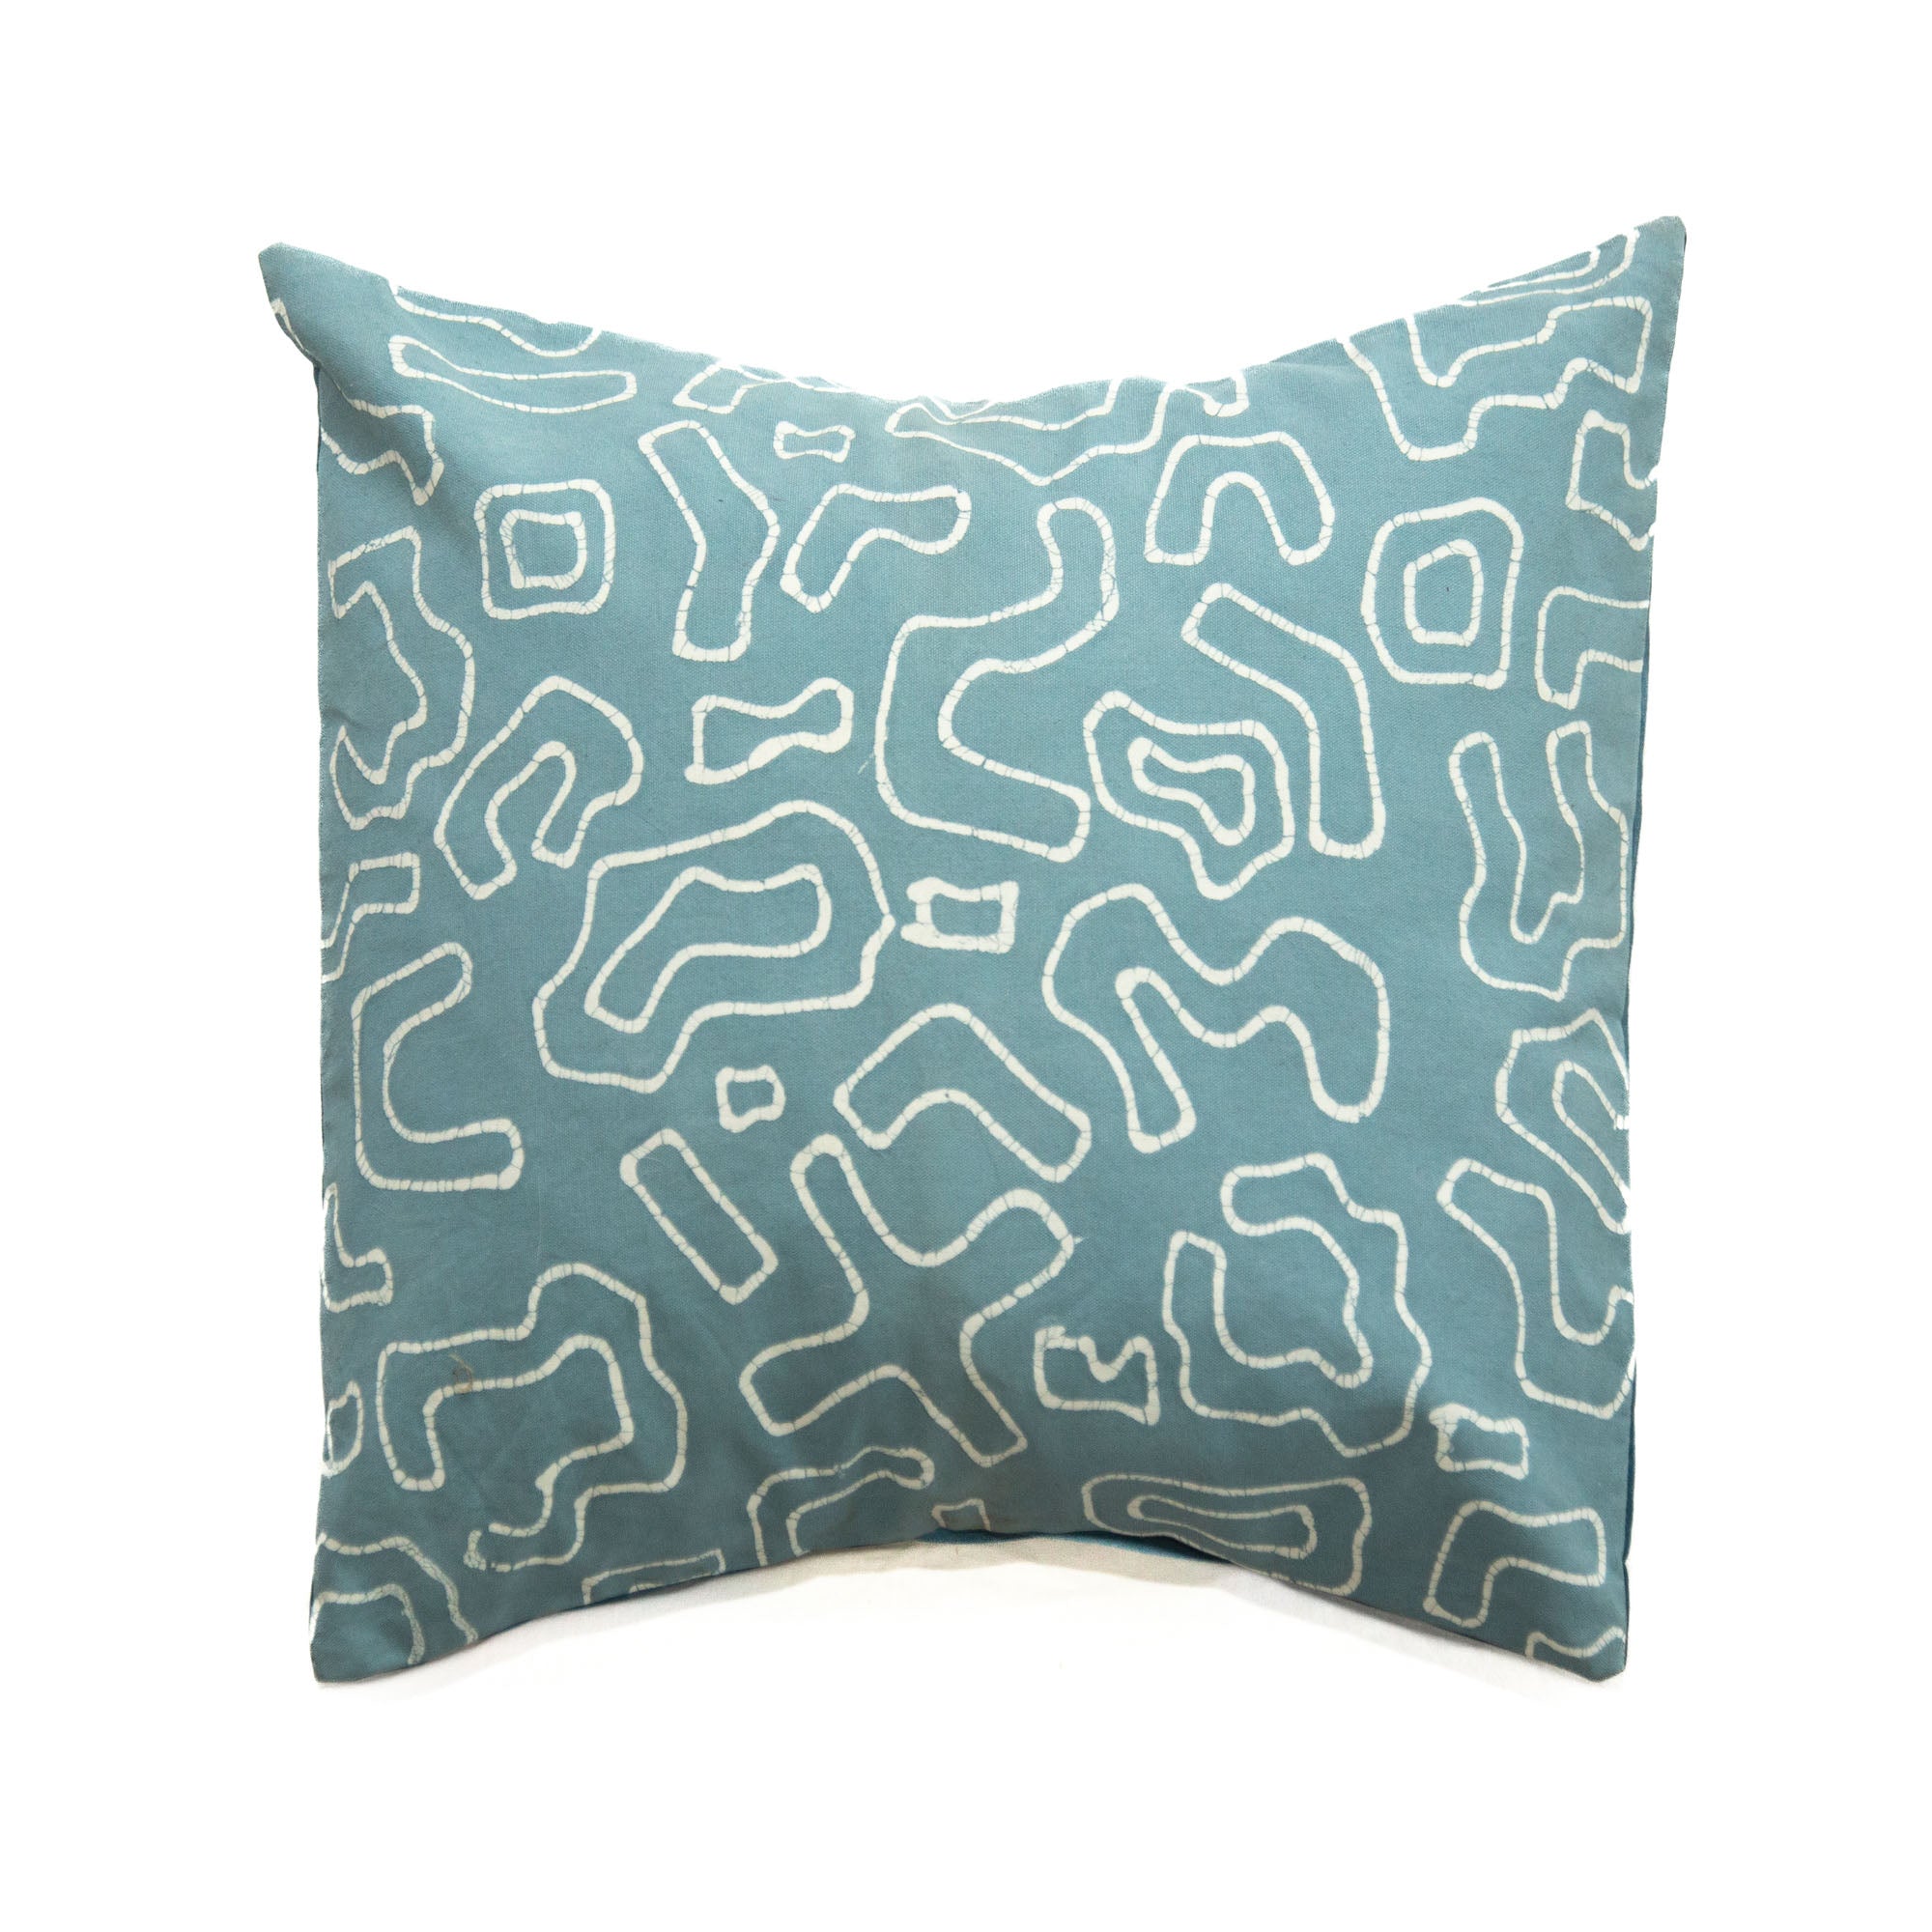 Kuba Blues Outline Light Blue Cushion Cover - Handmade by TRIBAL TEXTILES - Handcrafted Home Decor Interiors - African Made